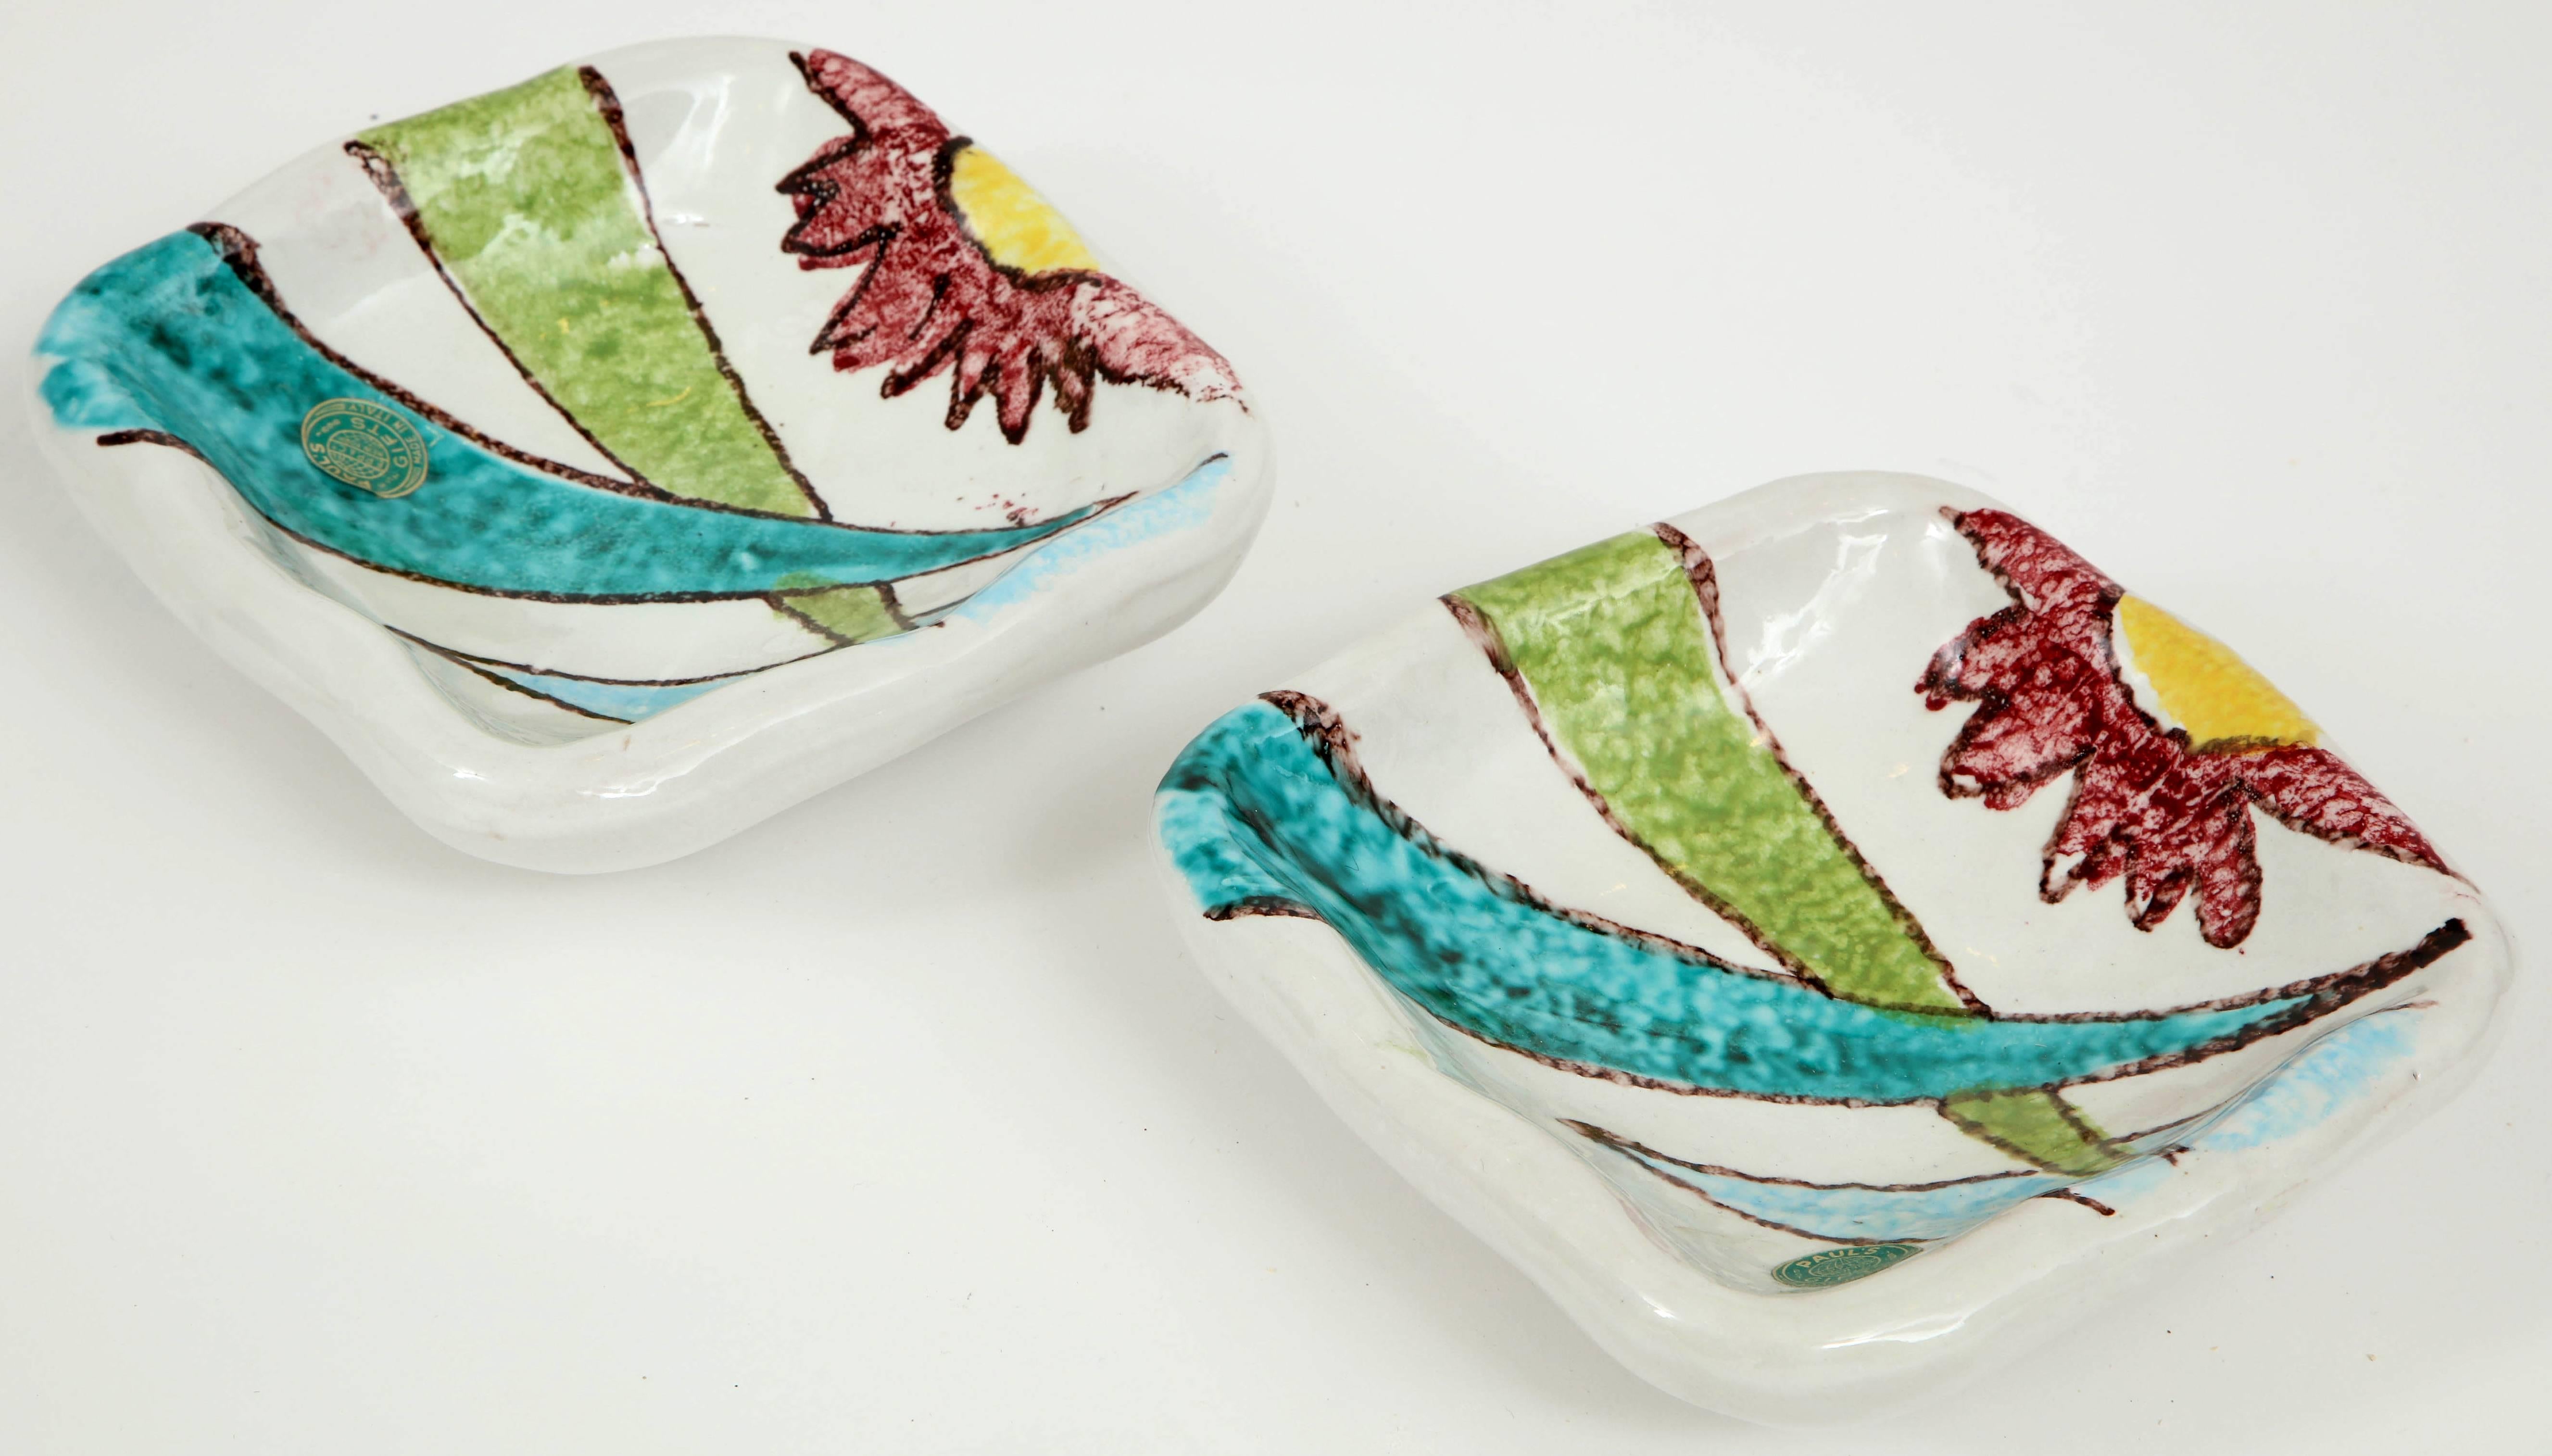 Fun and beautifully hand painted pair of 1950s Italian ceramic bowls or small coupes attributed to Alvino Bagni. Fun period 1950s colors of aqua, lime green, maroon, light blue and yellow with a nice chunky feel to them! Original 1950s stickers and